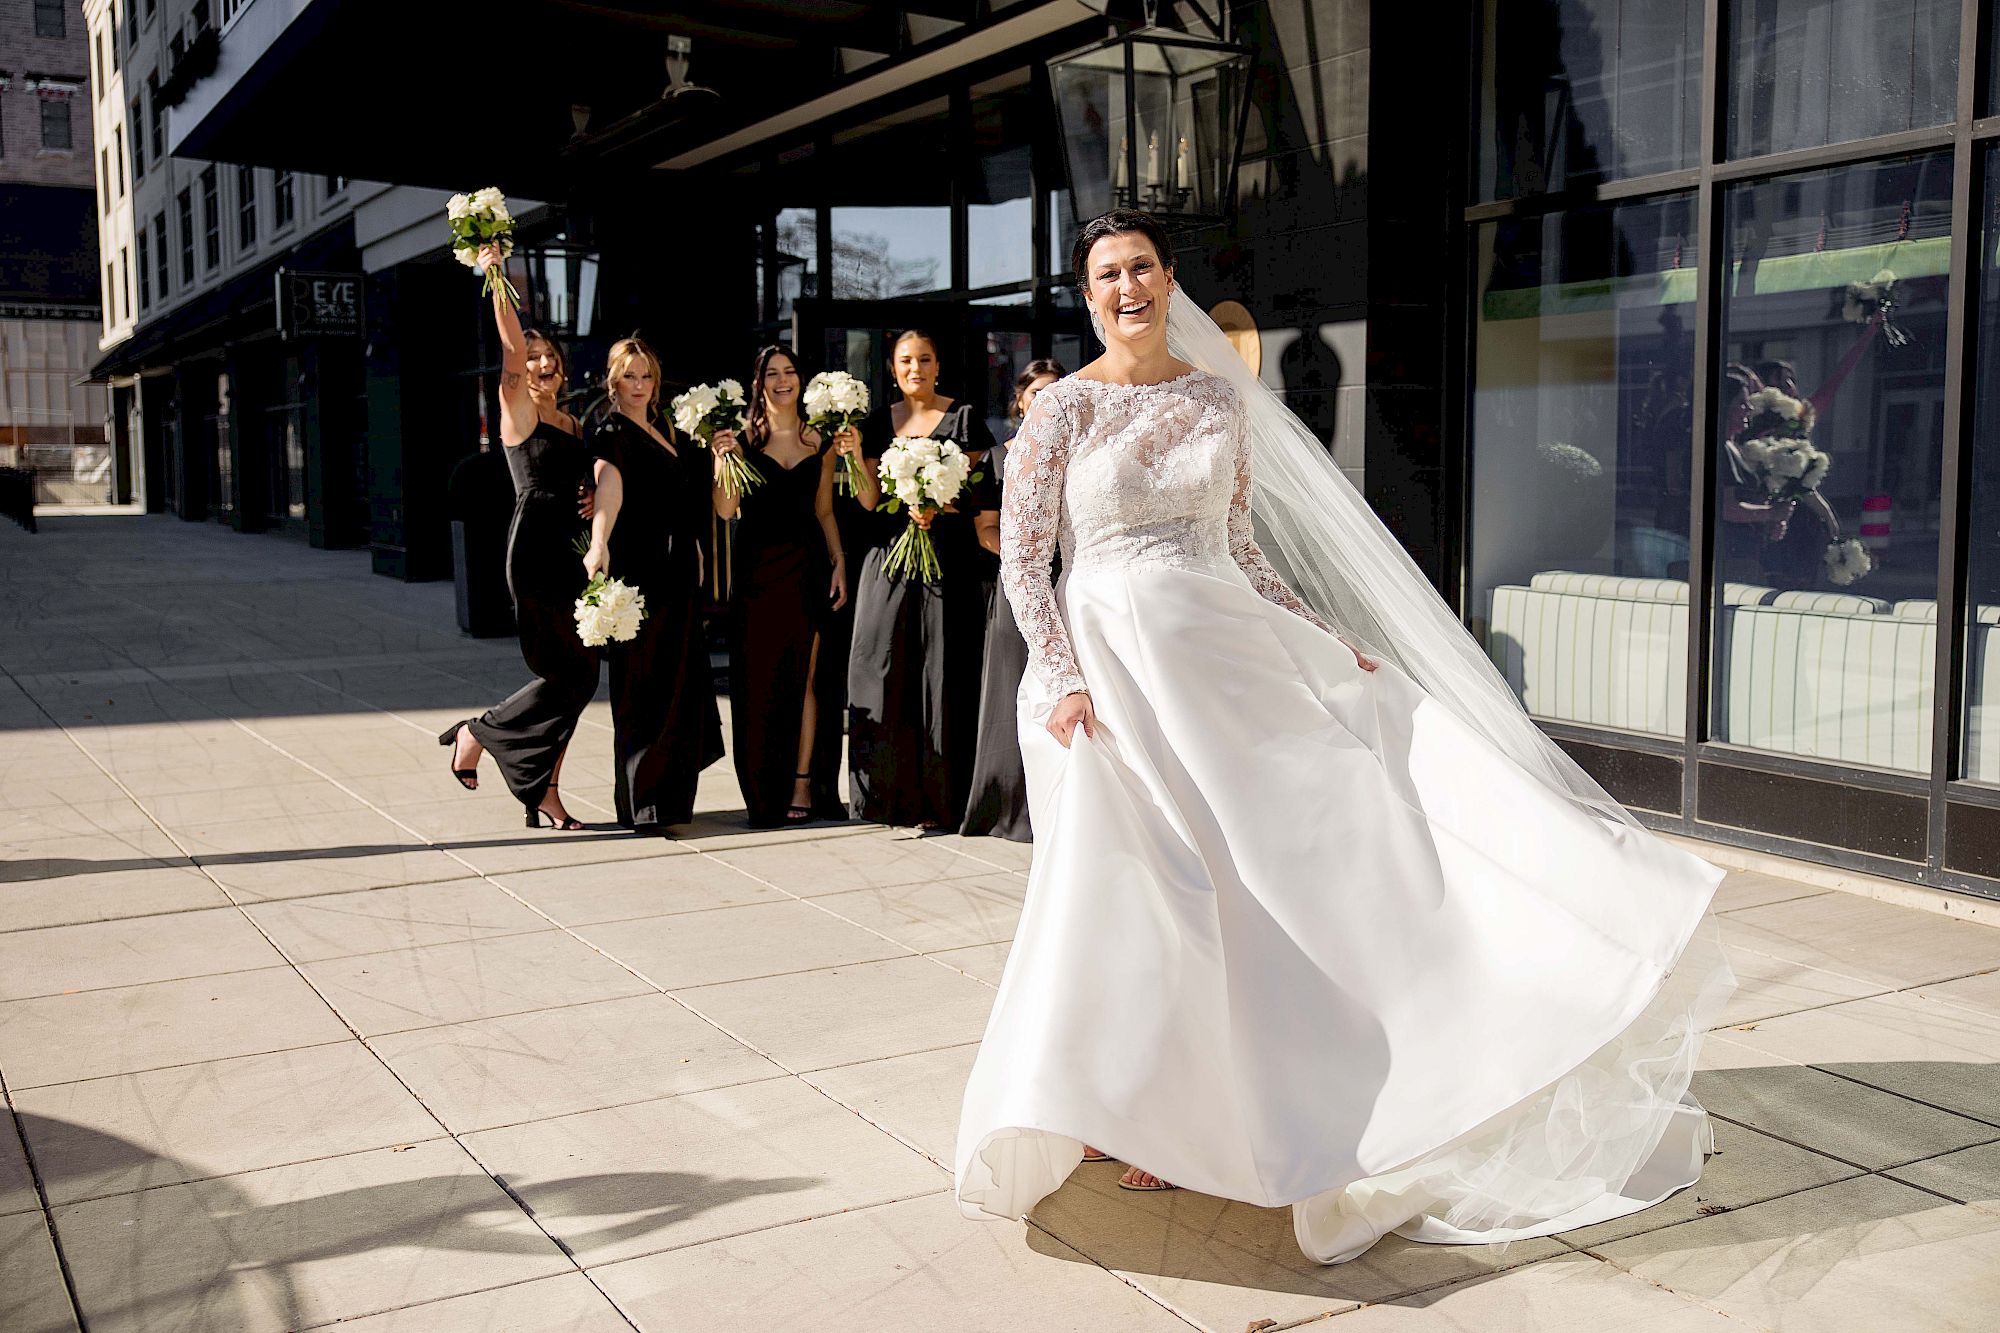 A joyful bride is twirling in her wedding dress outdoors with her bridesmaids cheering and holding bouquets in the background.